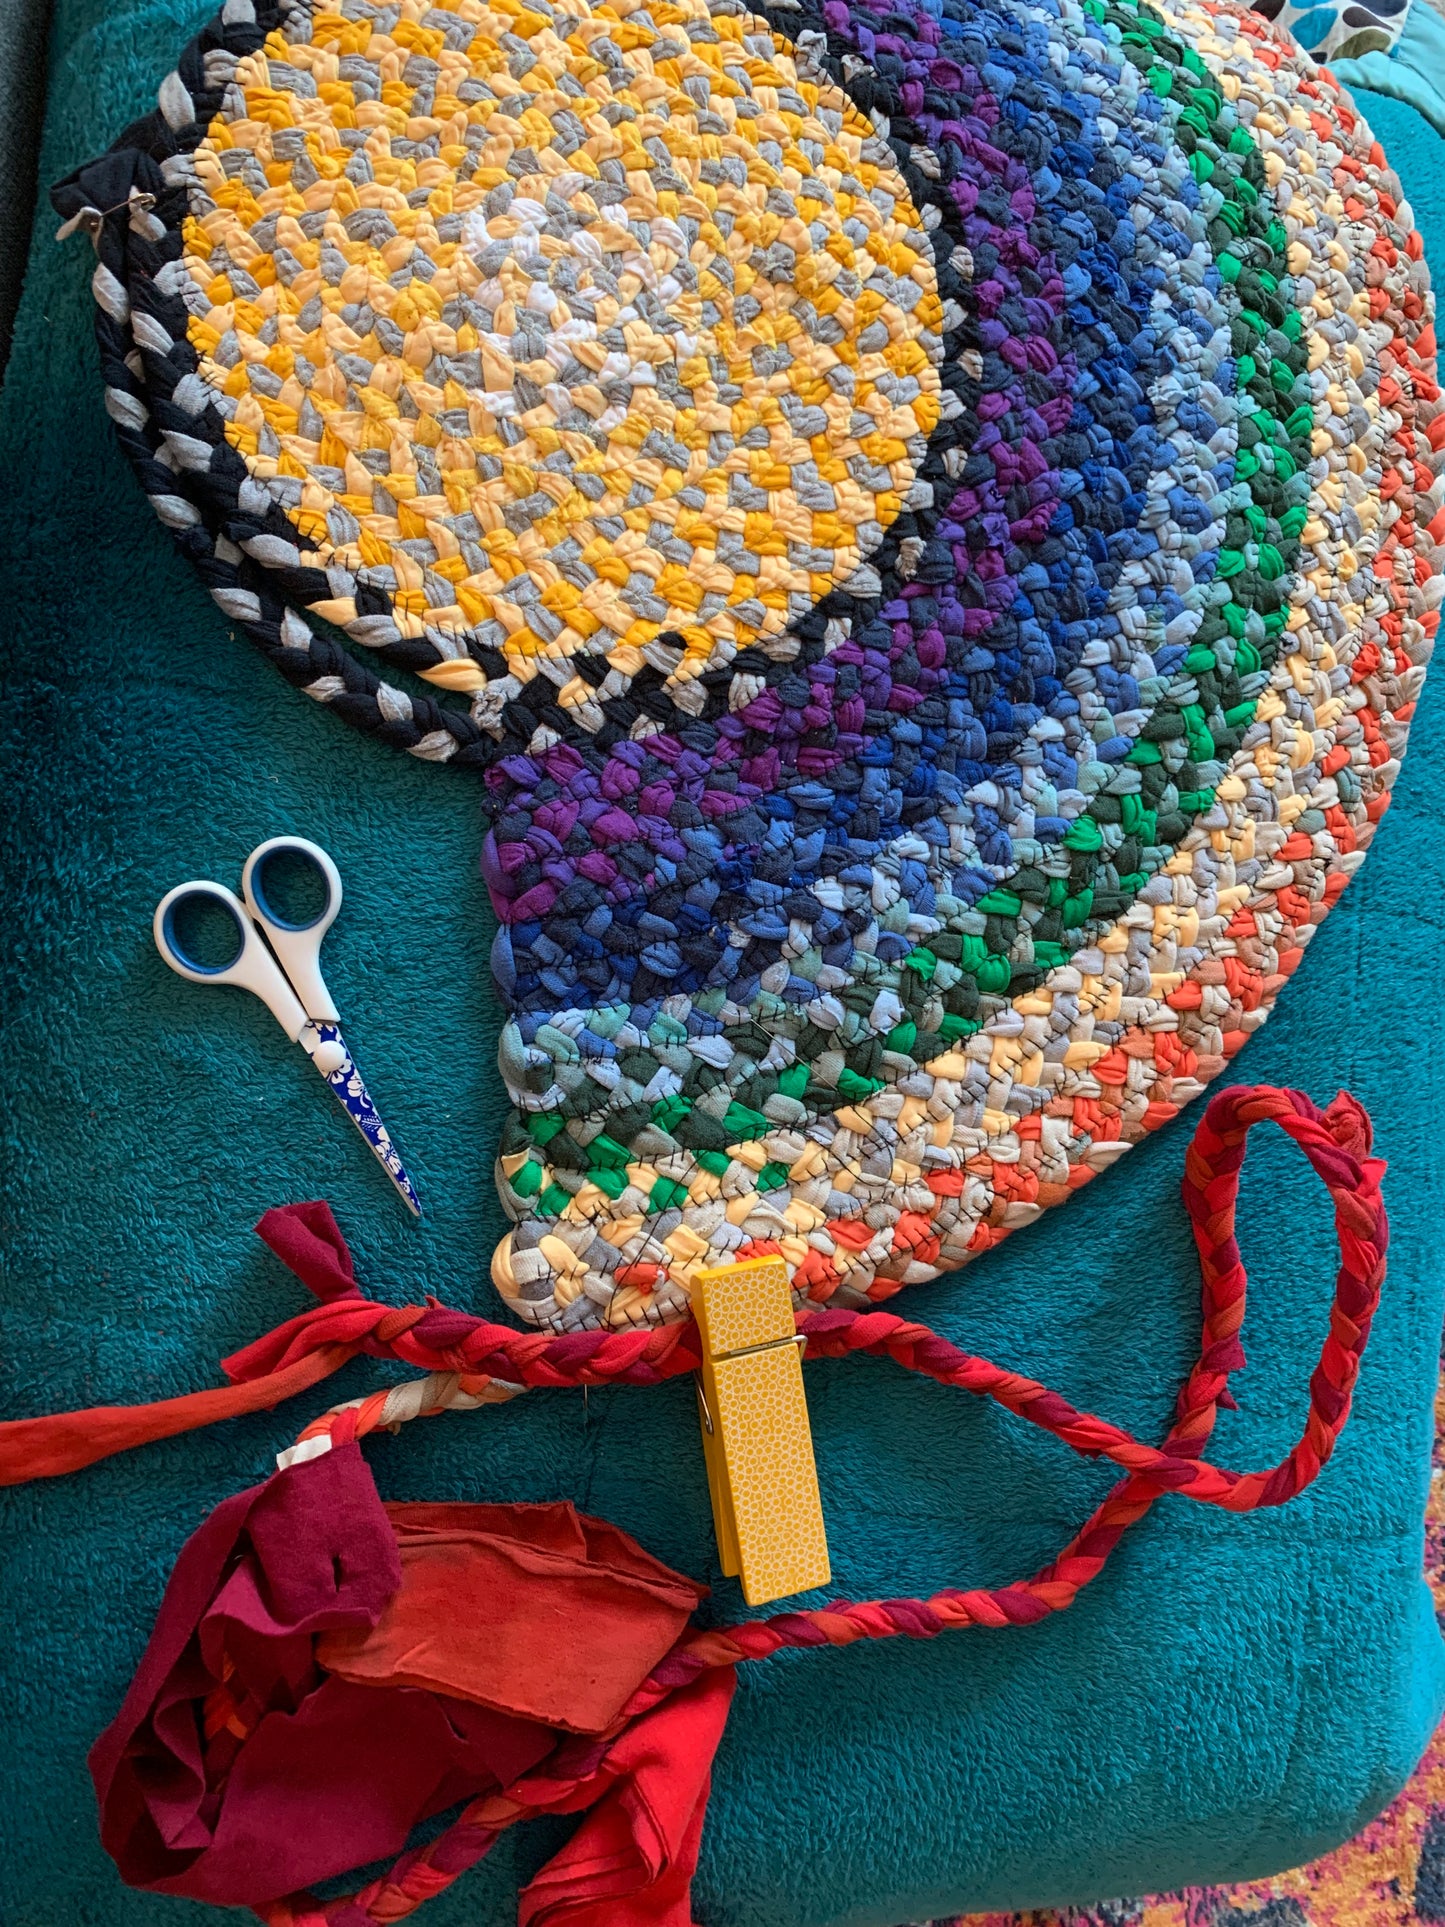 A rainbow rug in progress, on top of a fuzzy blanket, with loose braided red strand and a pair of scissors on top.